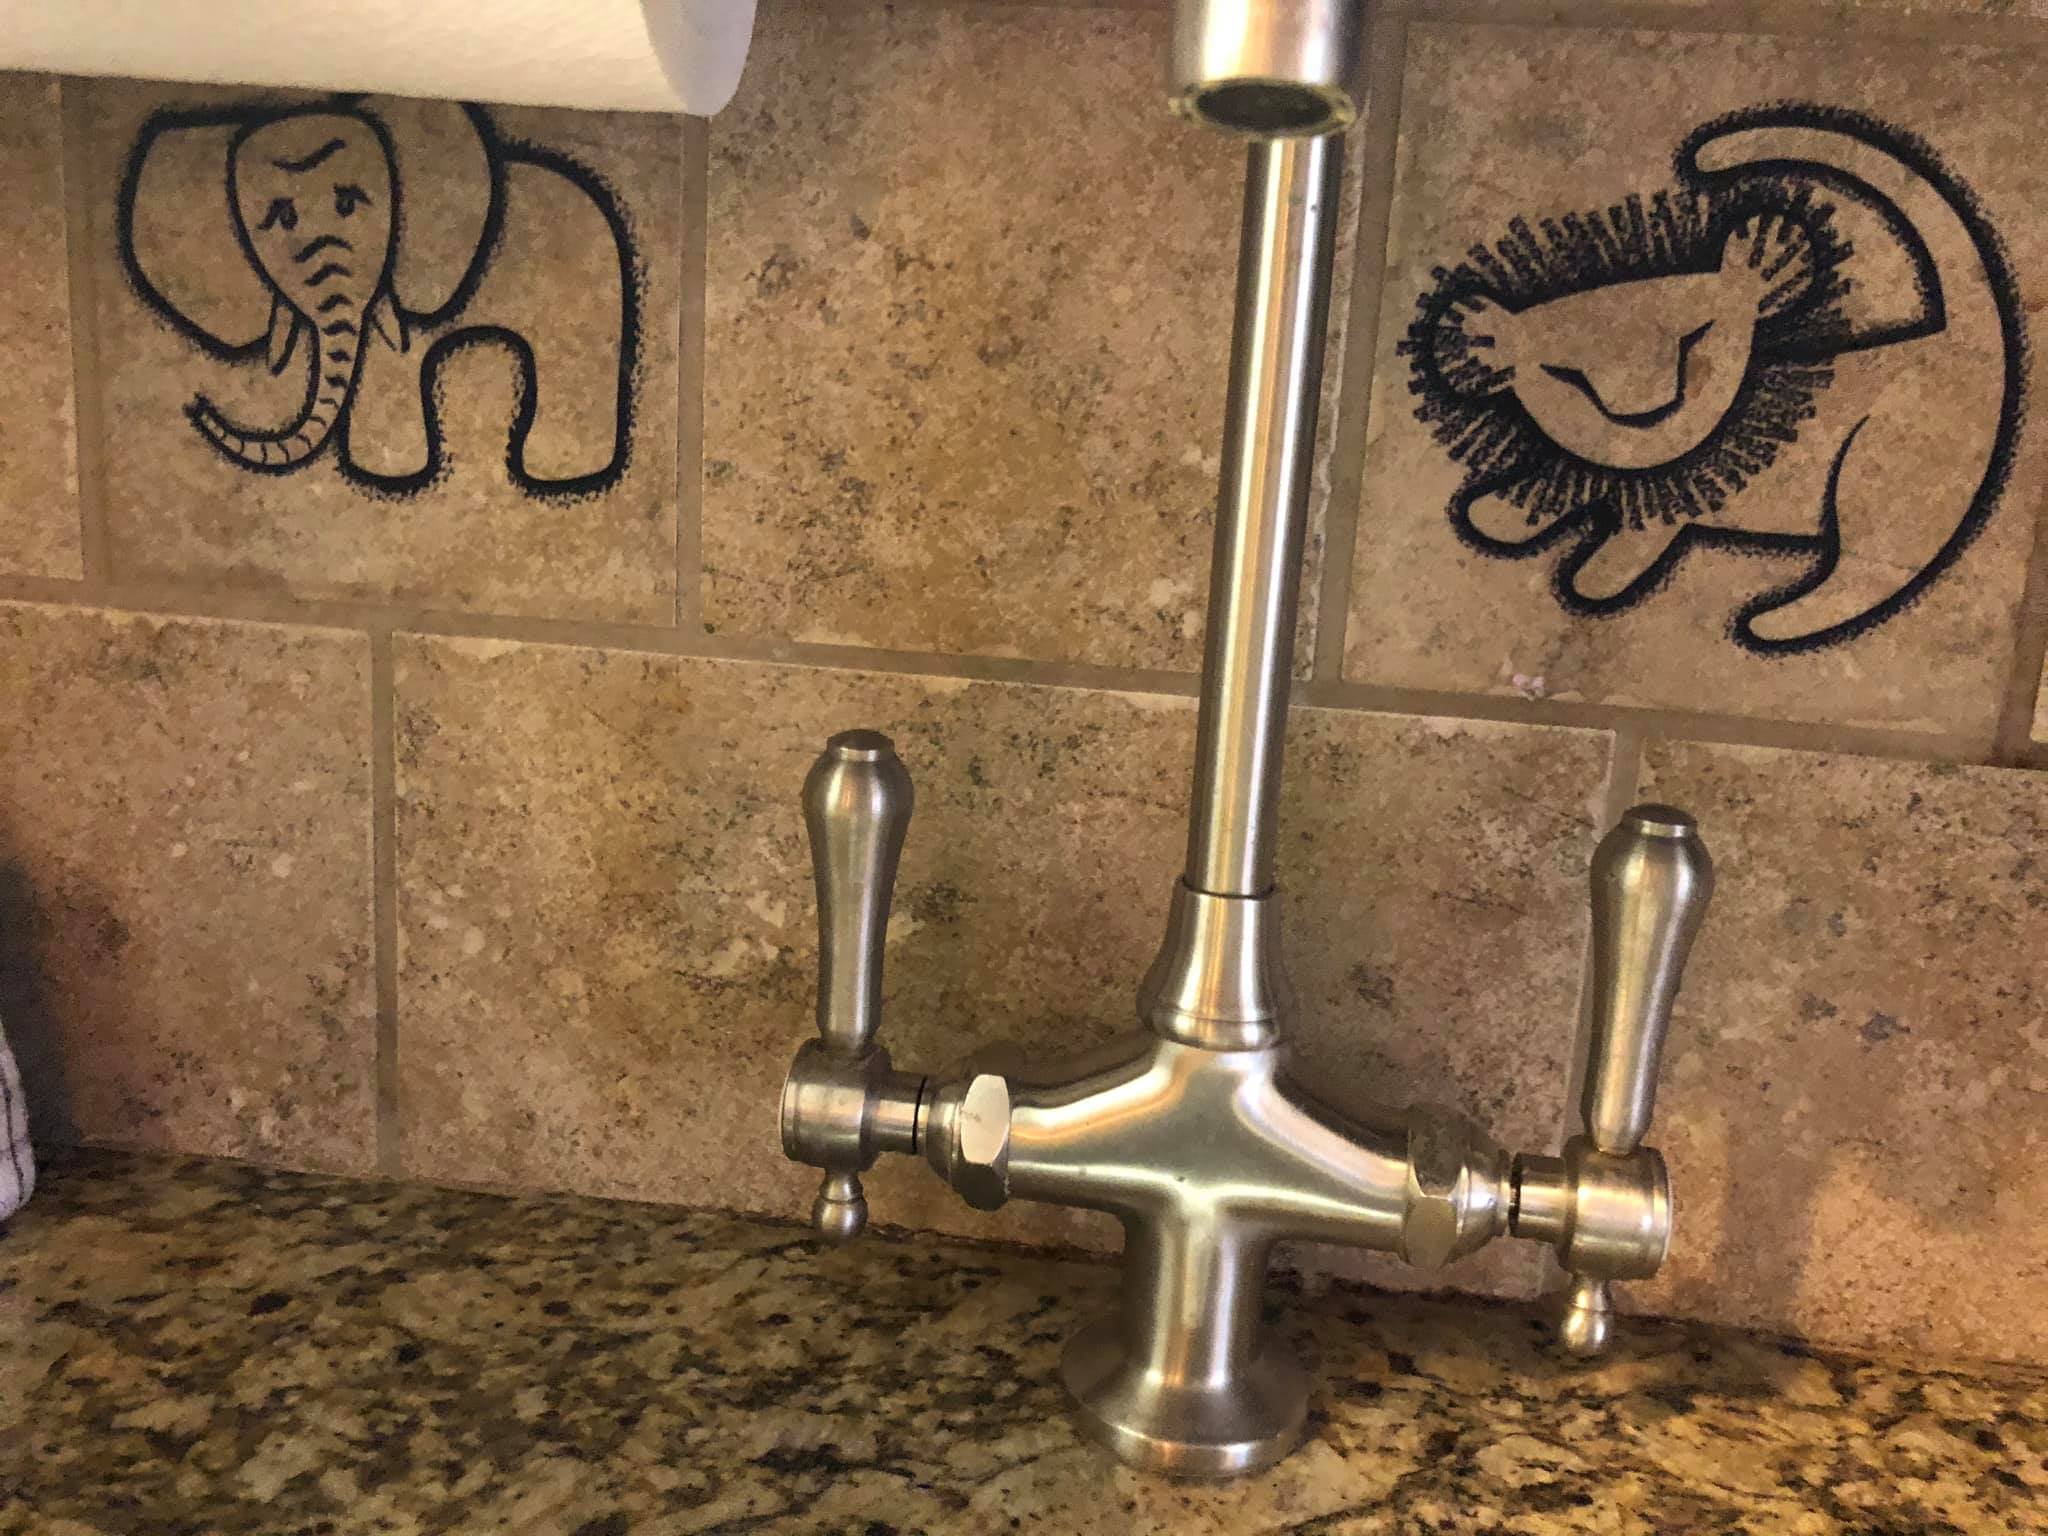 Jambo Deluxe Studio | Sink With Elephant and Lion Printed Tiles